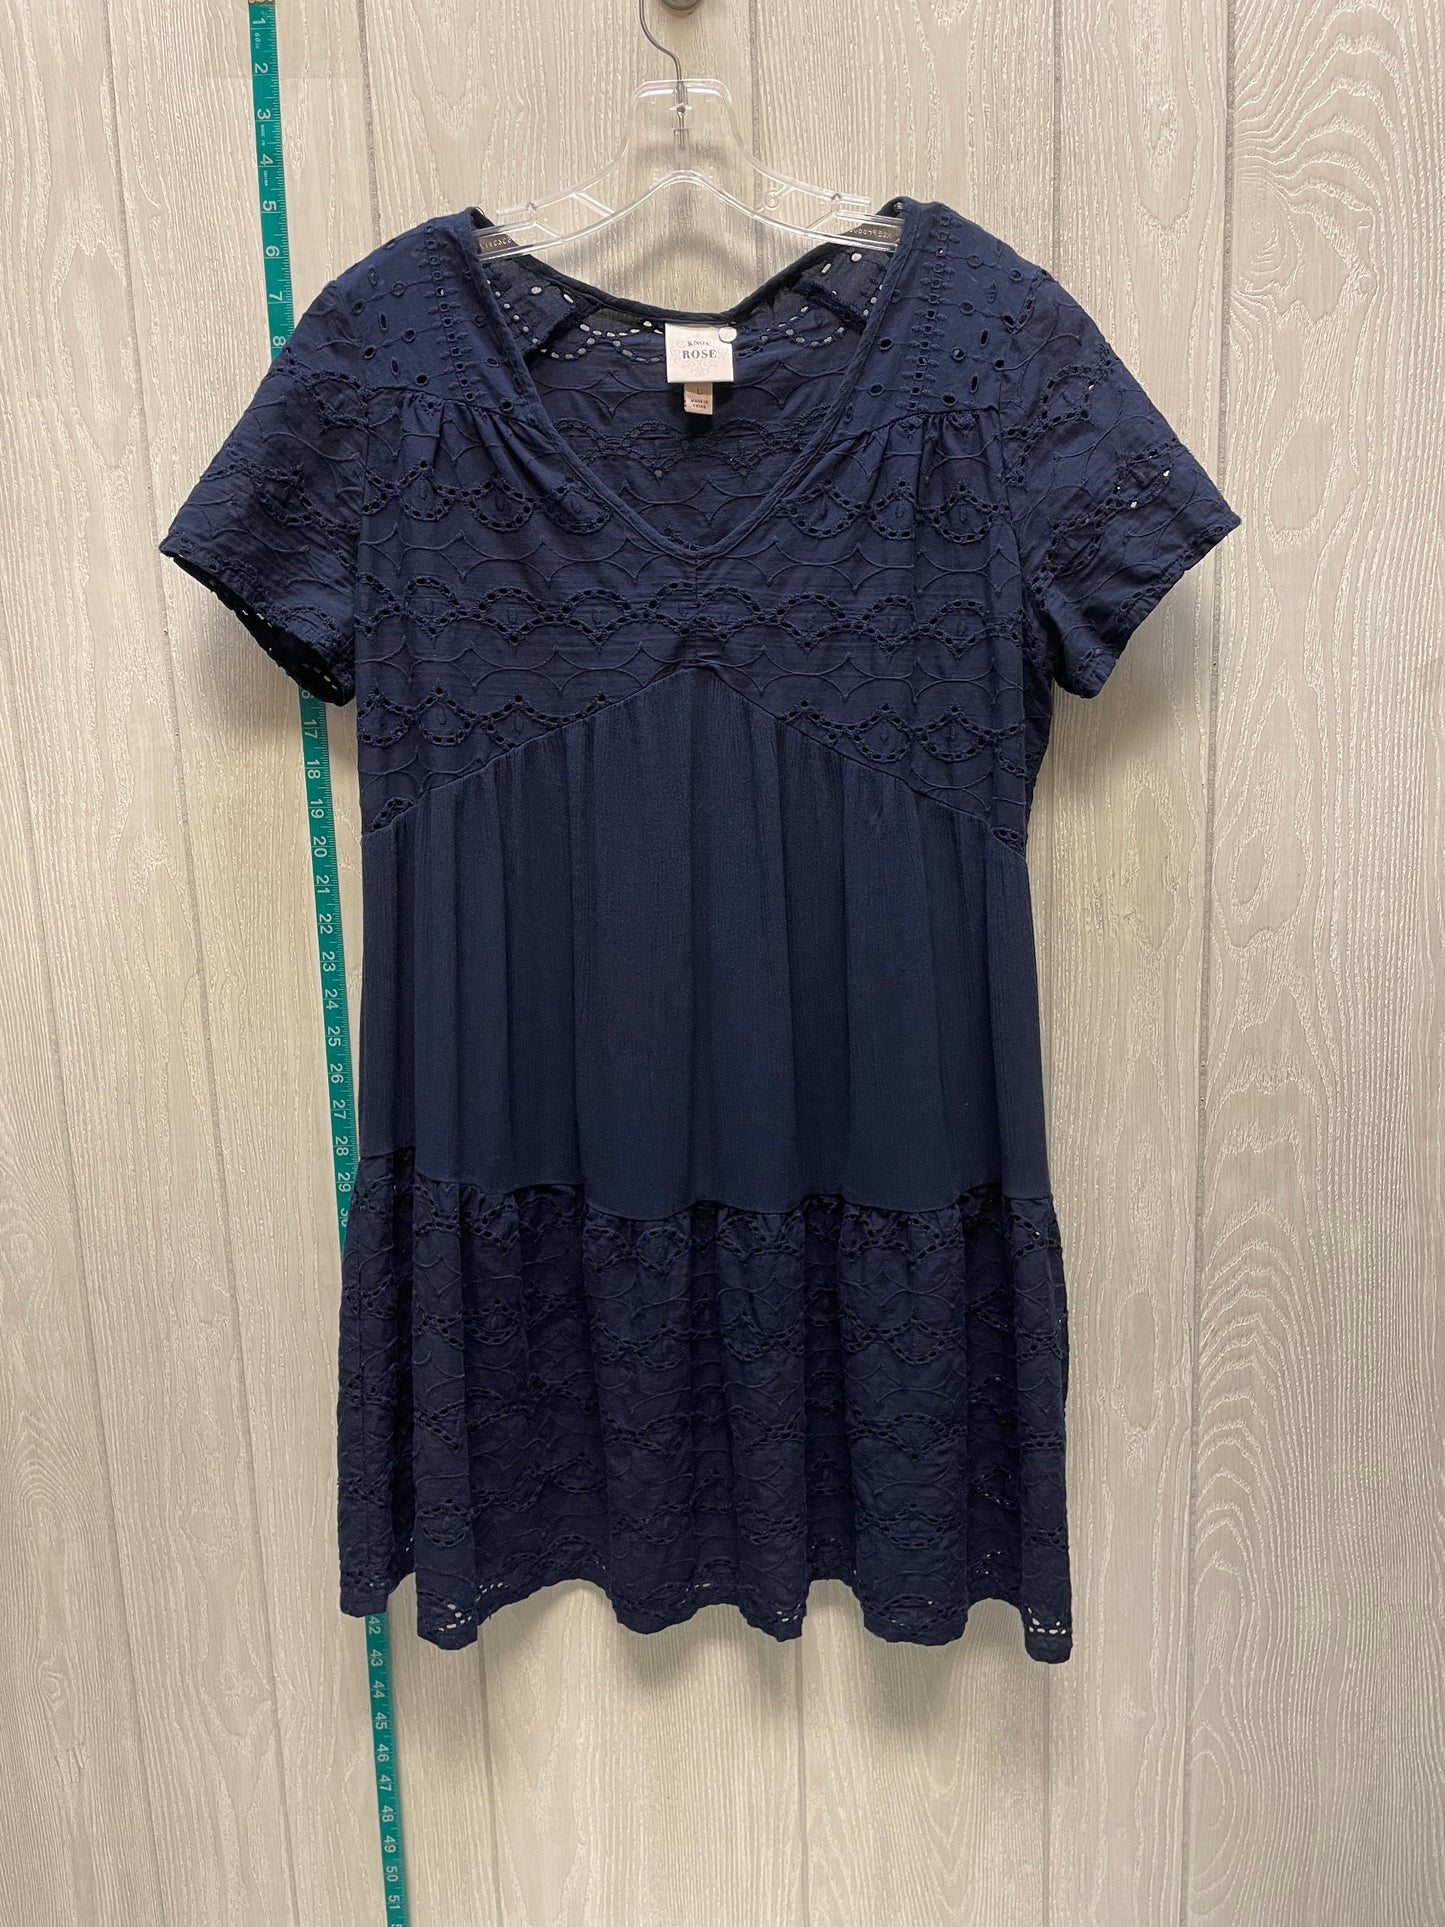 Navy Dress Casual Short Knox Rose, Size L